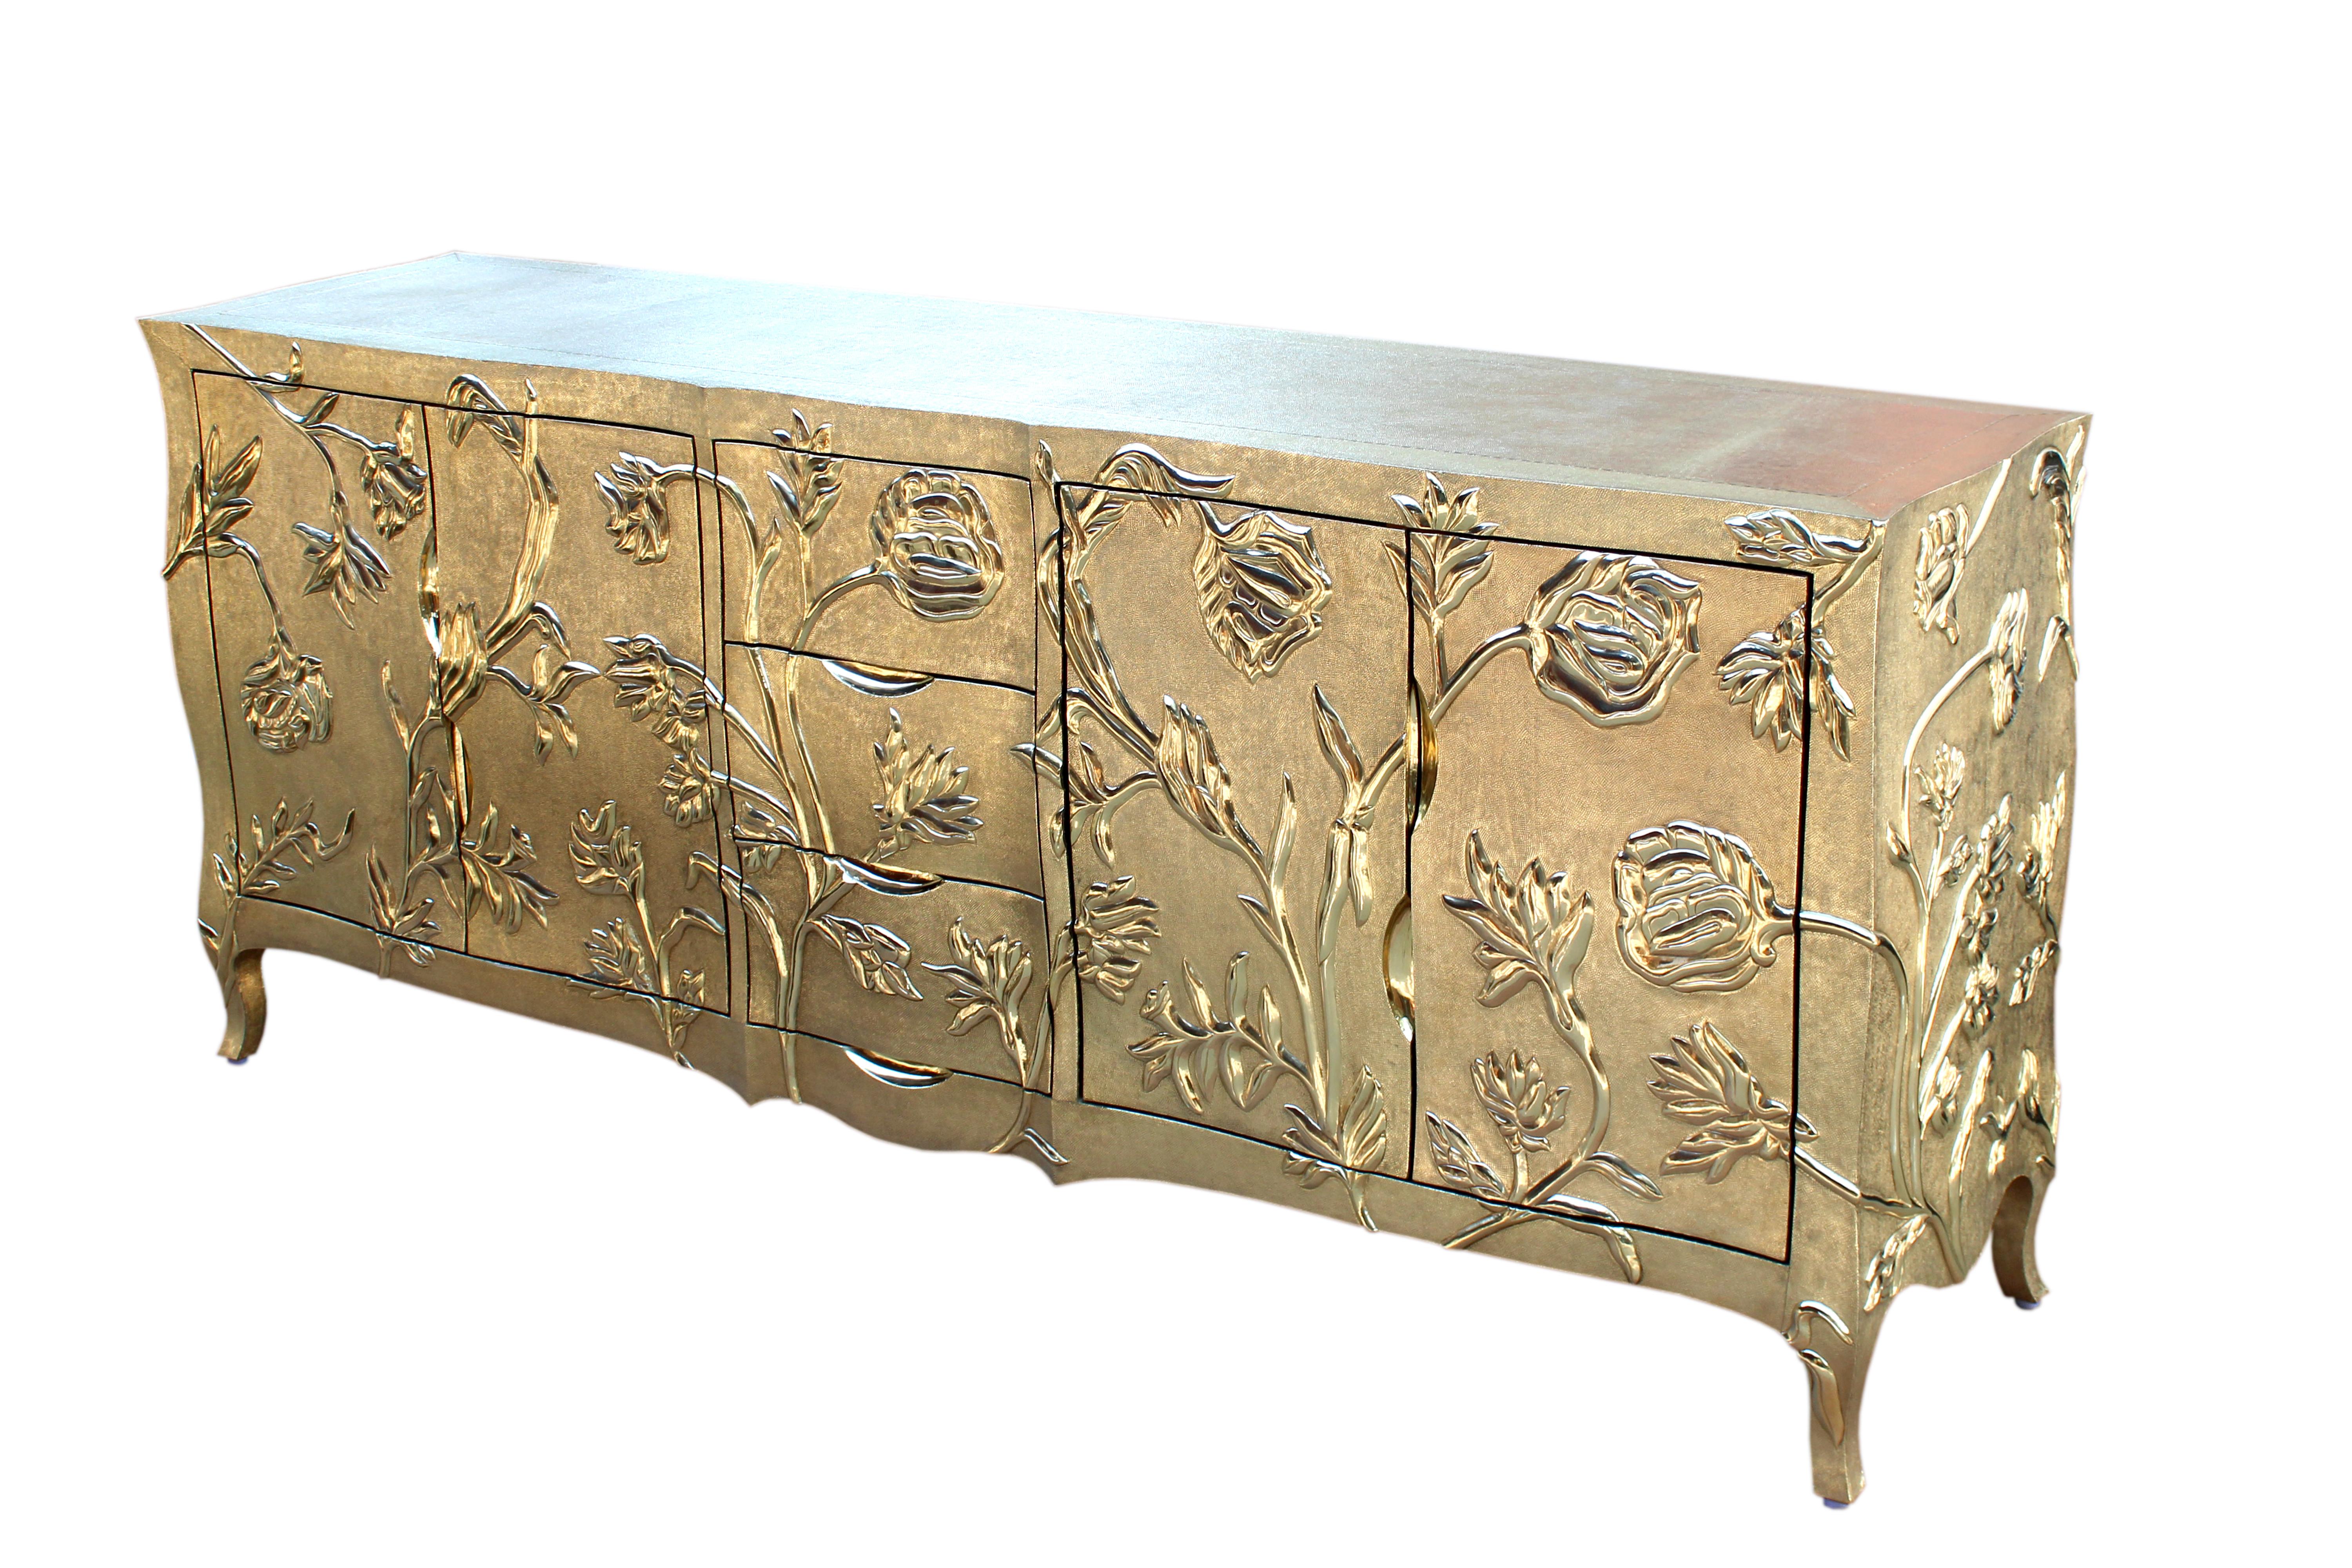 Wood Louise Floral Art Deco Dresser Fine Hammered Brass by Paul Mathieu For Sale